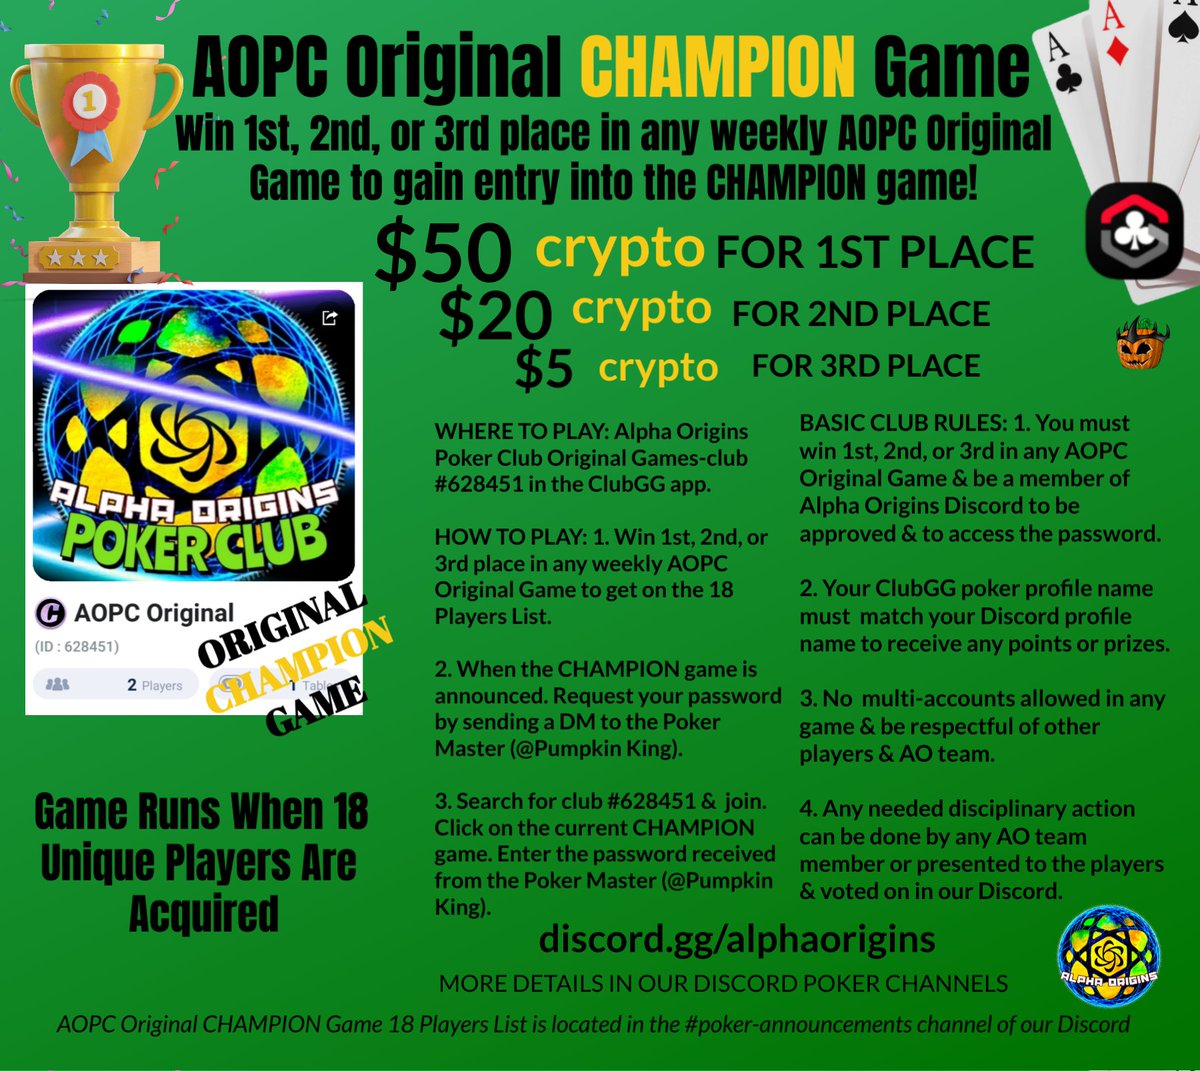 🃏 Join us tonight at 8PM ET for the AOPC Original Game! ♠️♦️ The top winners will earn a seat at the prestigious AOPC Champions Game! Don't miss out on your chance to compete and claim victory. See you at the tables!♣️♥️#AOPC #PokerNight #Poker #Games #Cards